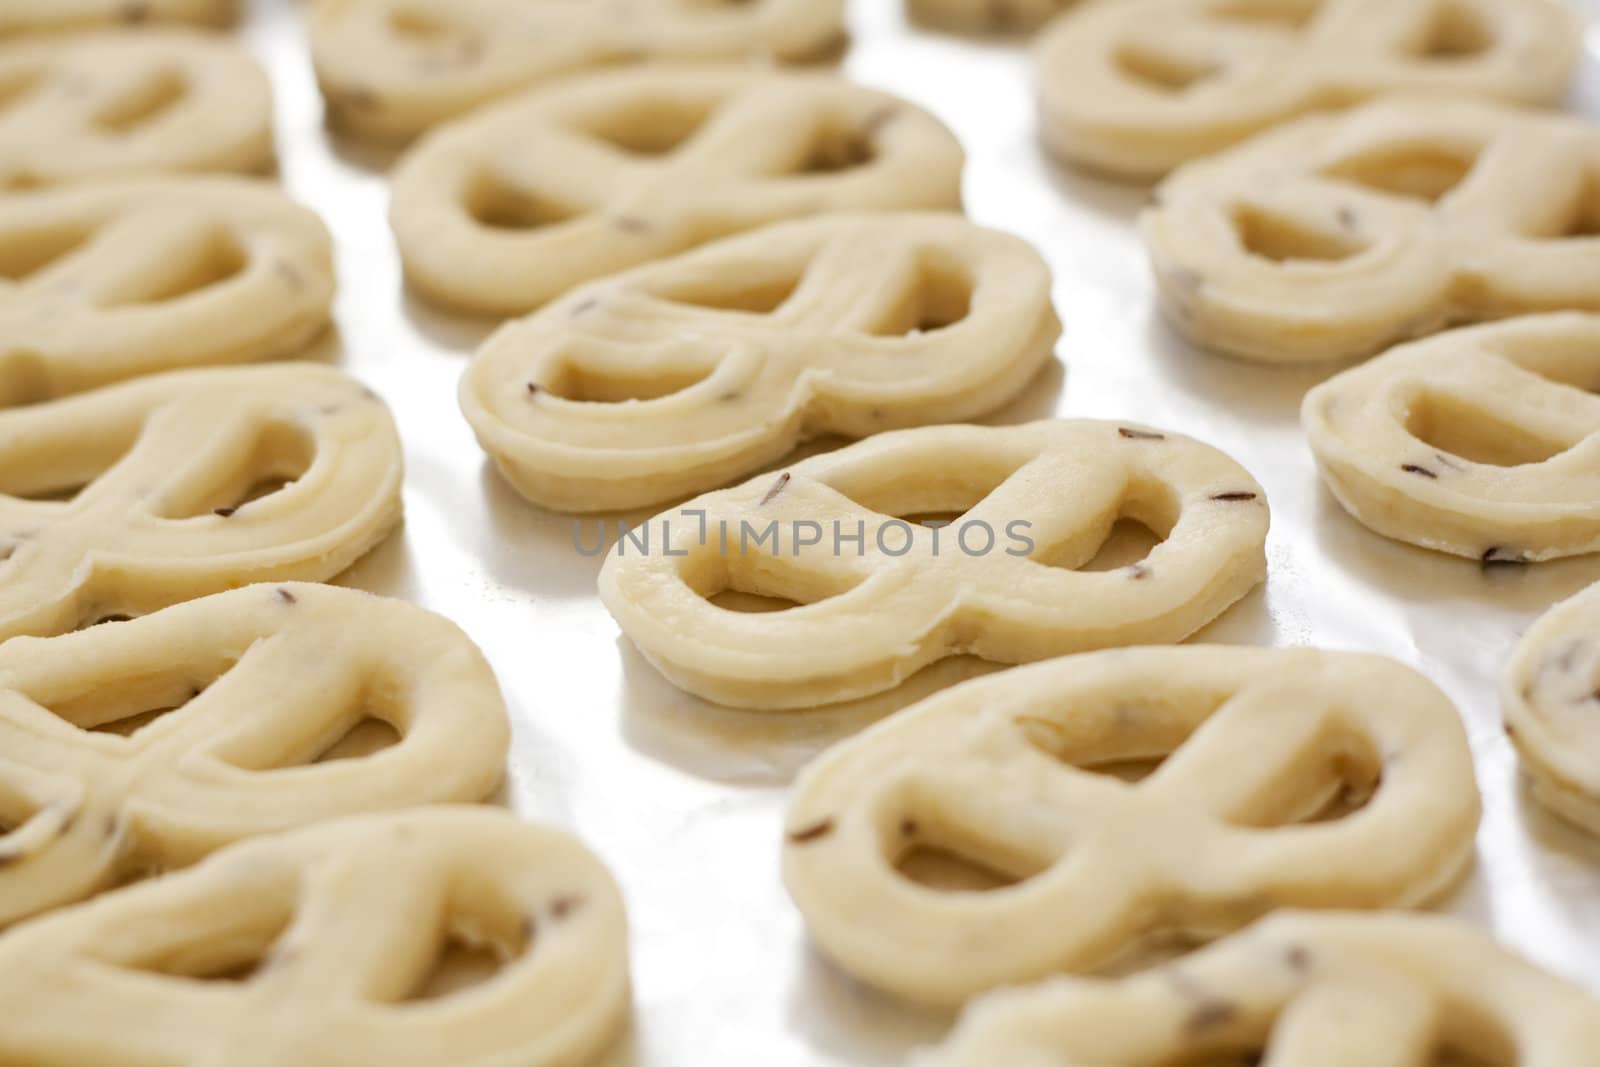 Cookies on aluminum foil ready to be baked. Shallow DOF, focus on selected cookie.